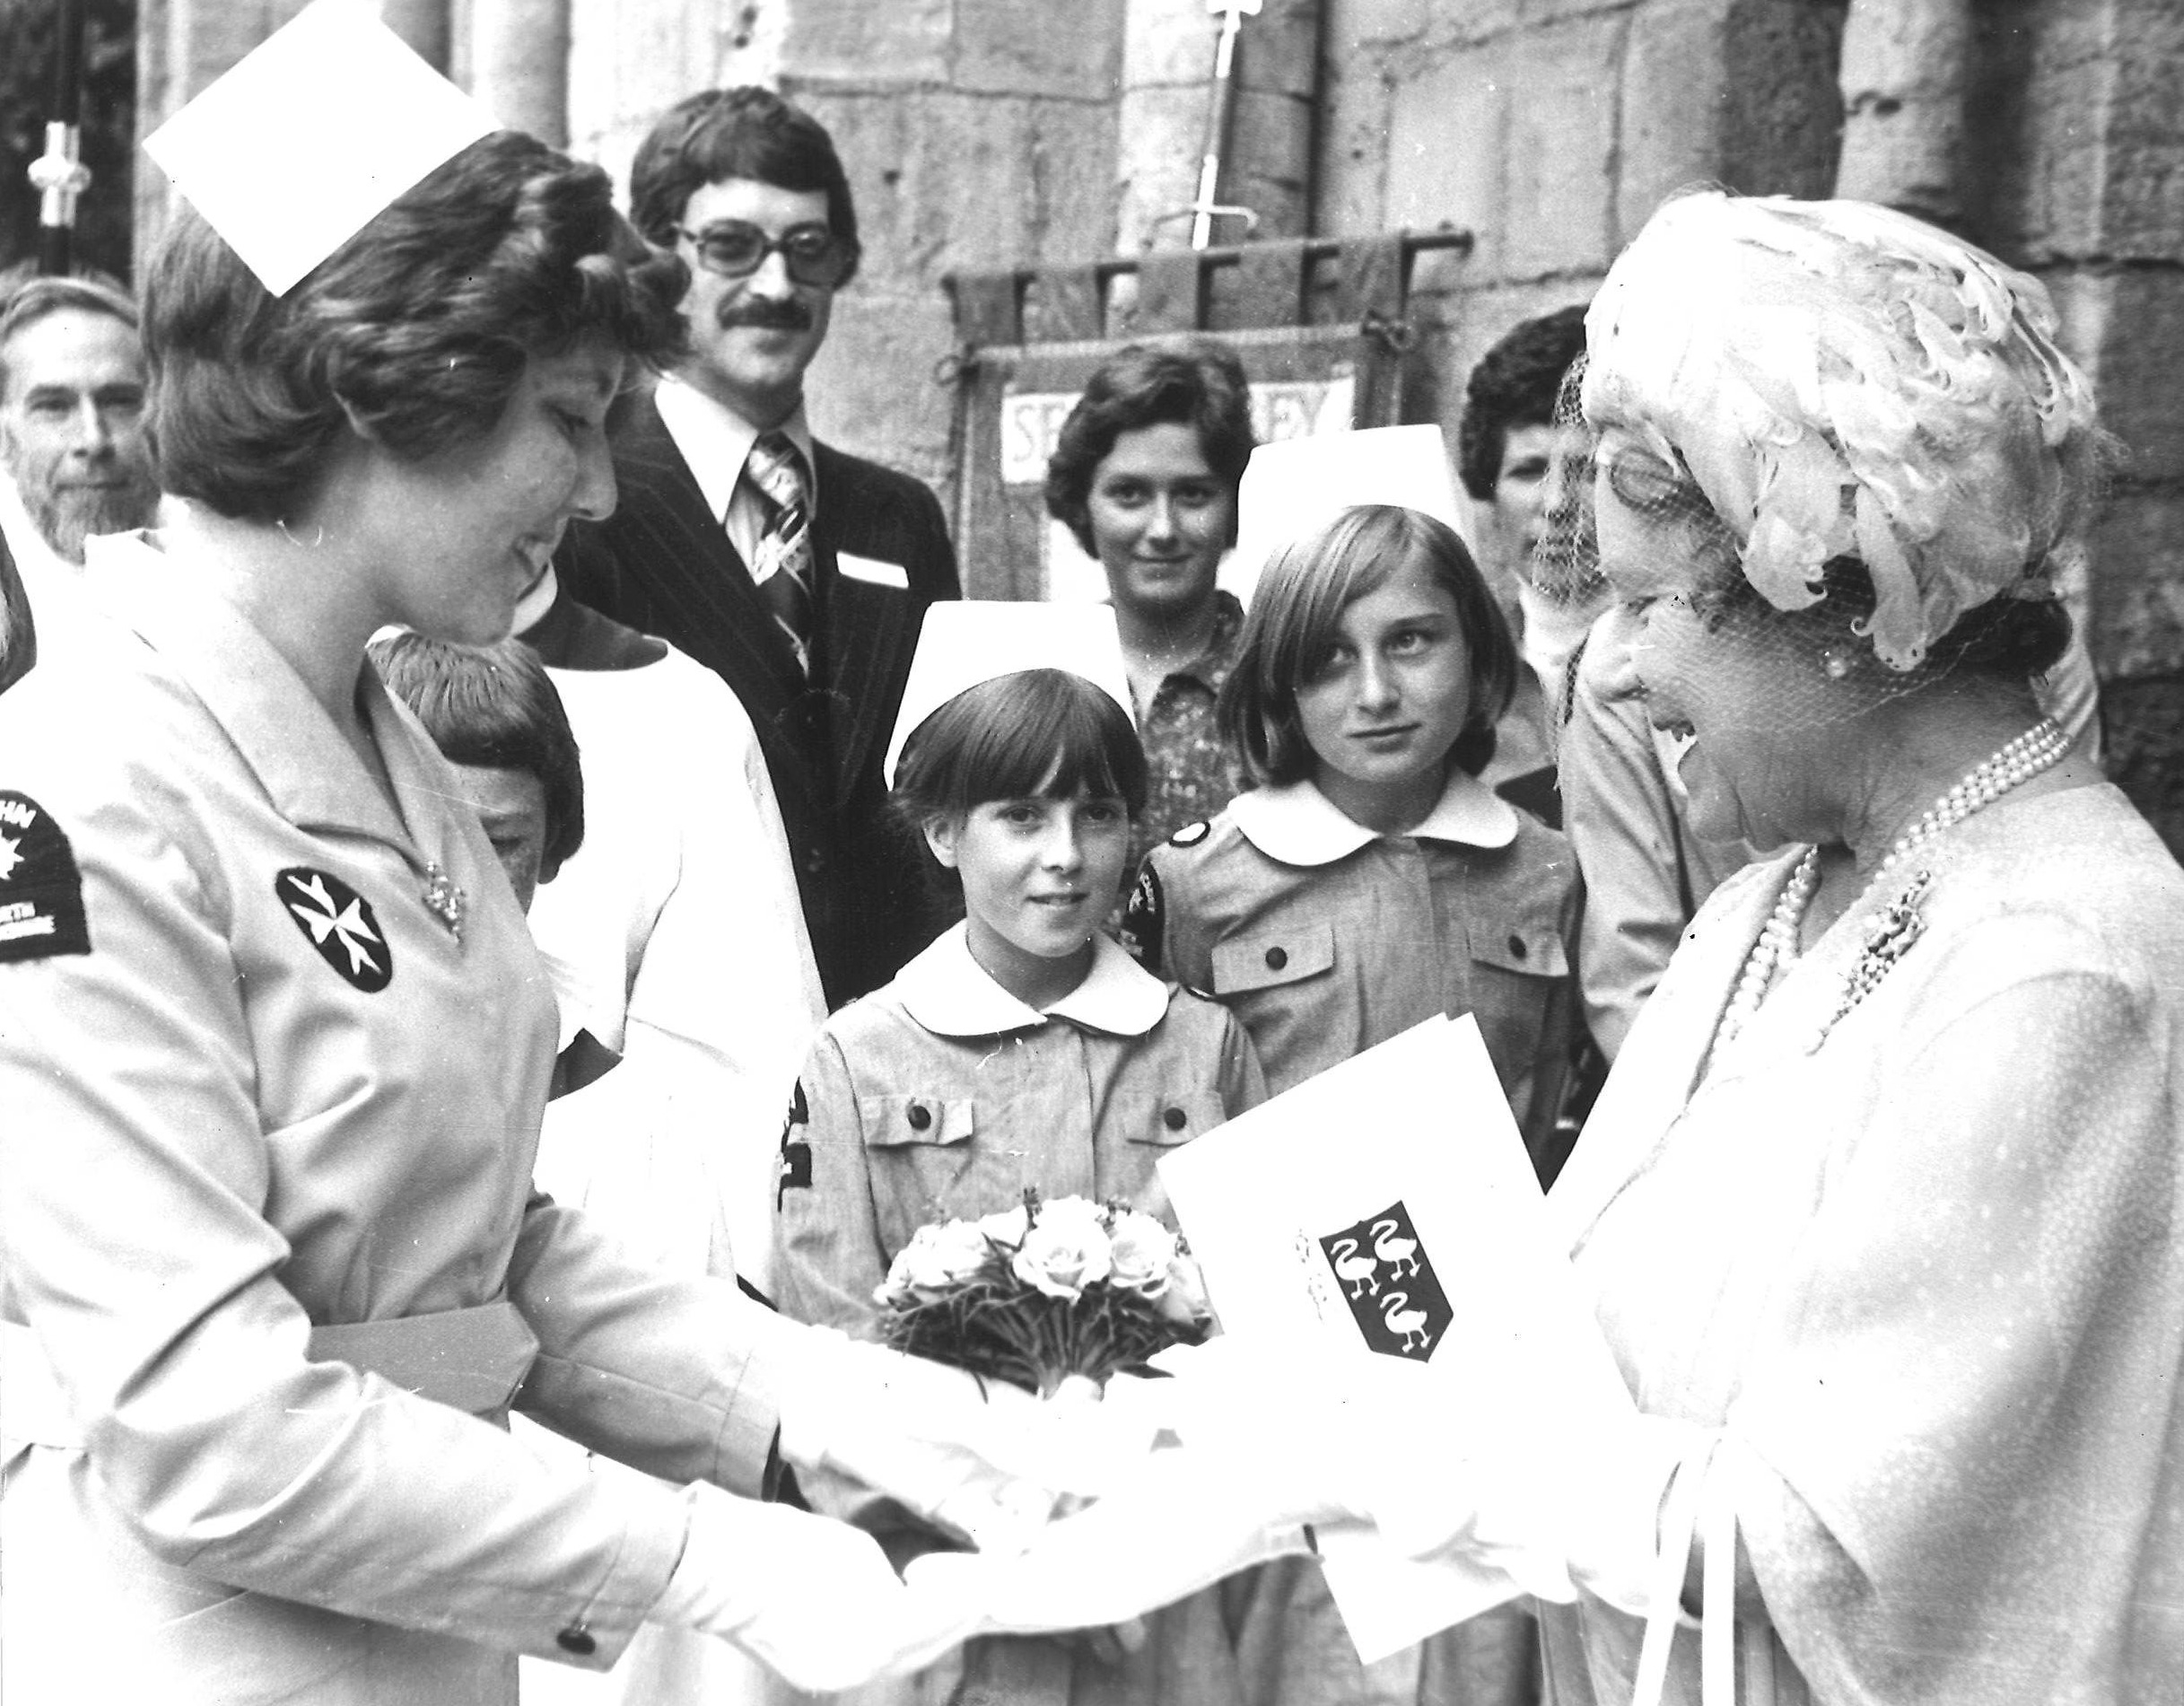 Black and white photograph of Queen Elizabeth II being greeted by a group of young Cadets and adults in uniform. They are presenting the Queen with a small bunch of roses.